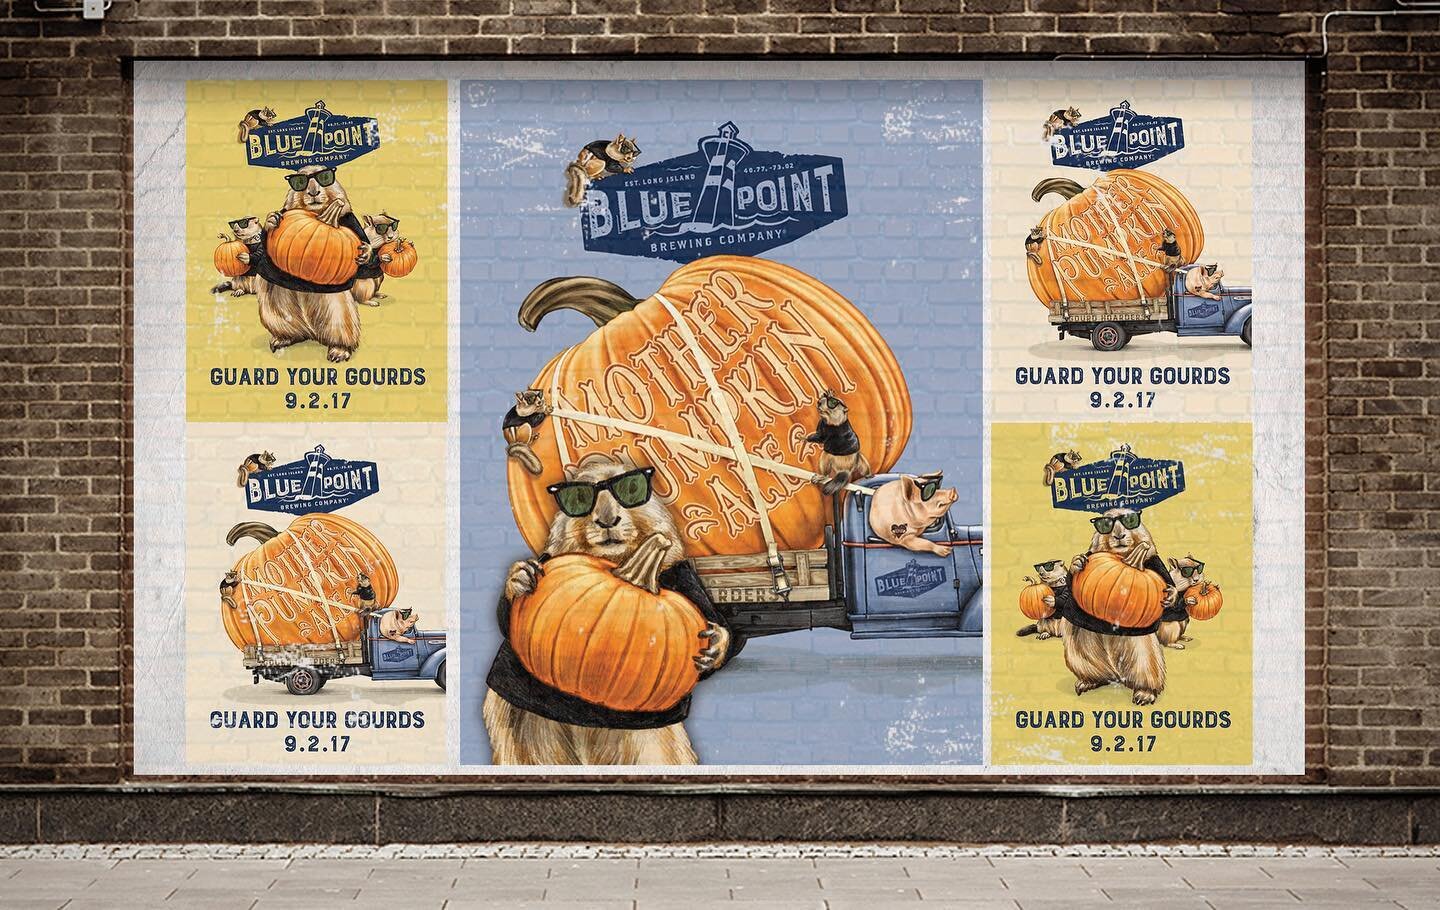 While pumpkins are on my mind, I was reminded of this package design I helped with a while back through @vsapartners for @bluepointbrewing. Illustrations by the amazing @timtomkinson